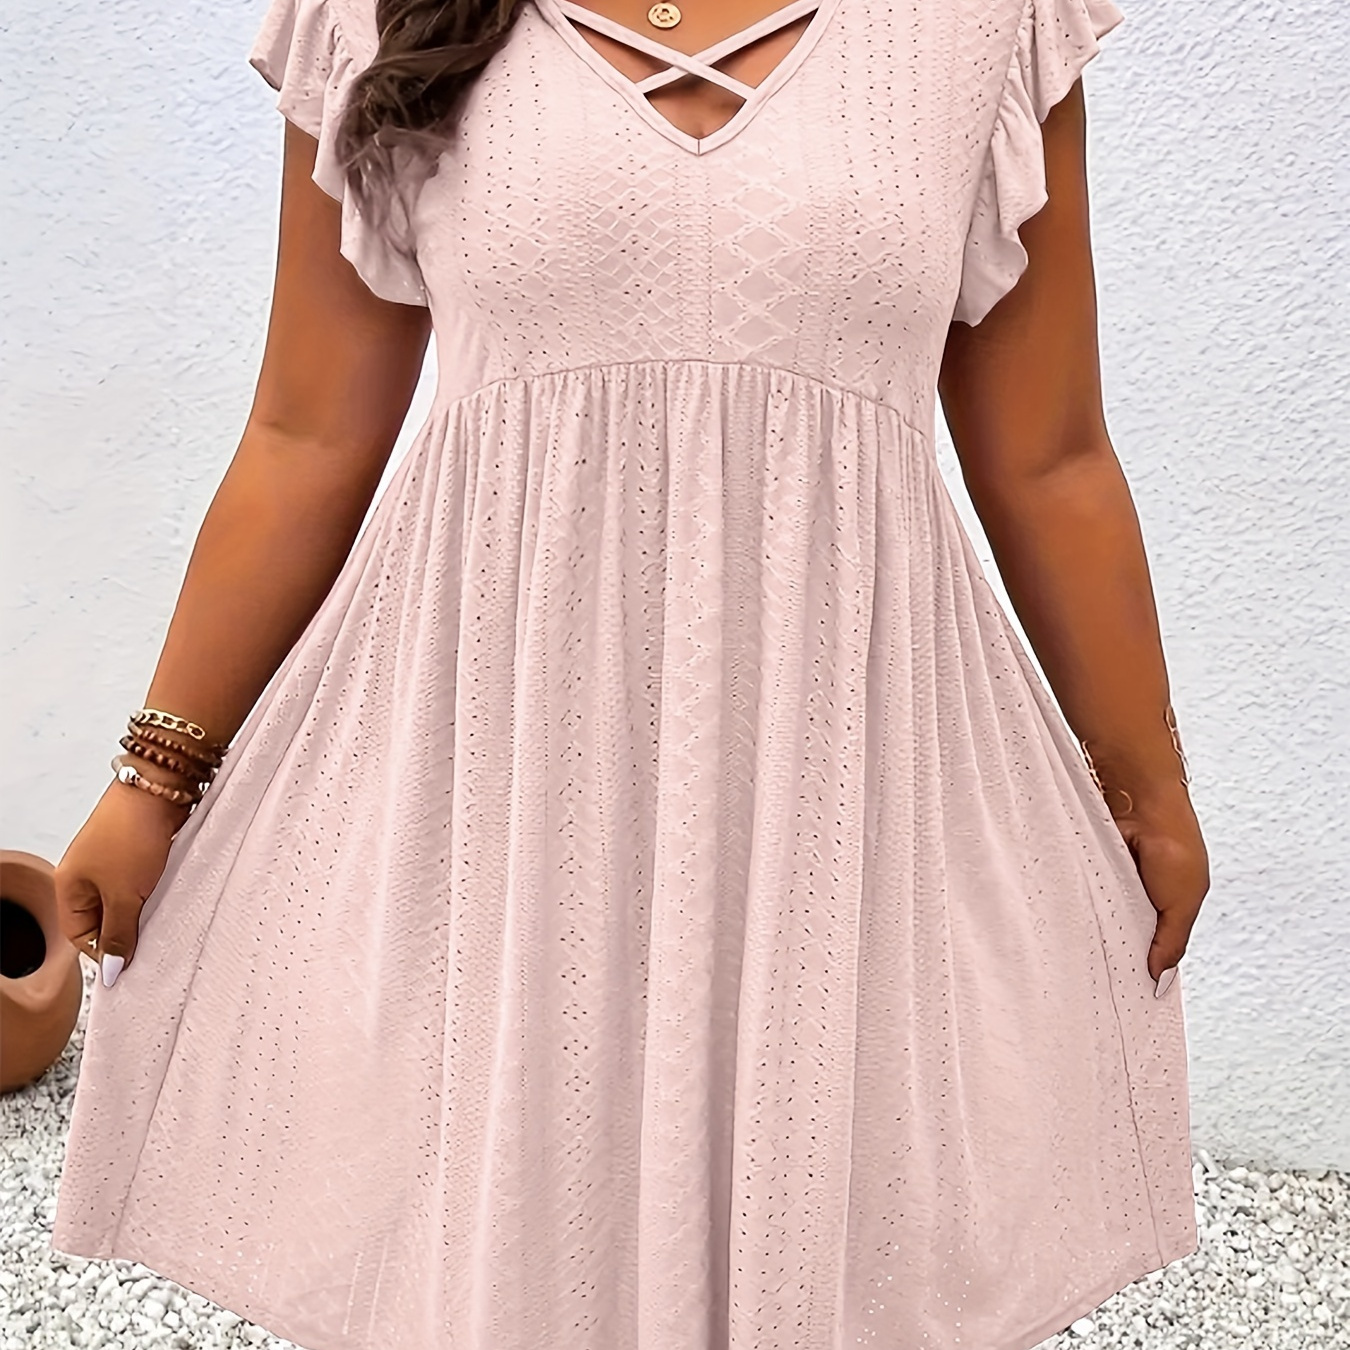 

Plus Size Solid Color Eyelet Dress, Casual Criss Cross Flutter Sleeve Ruched Dress For Spring & Summer, Women's Plus Size Clothing